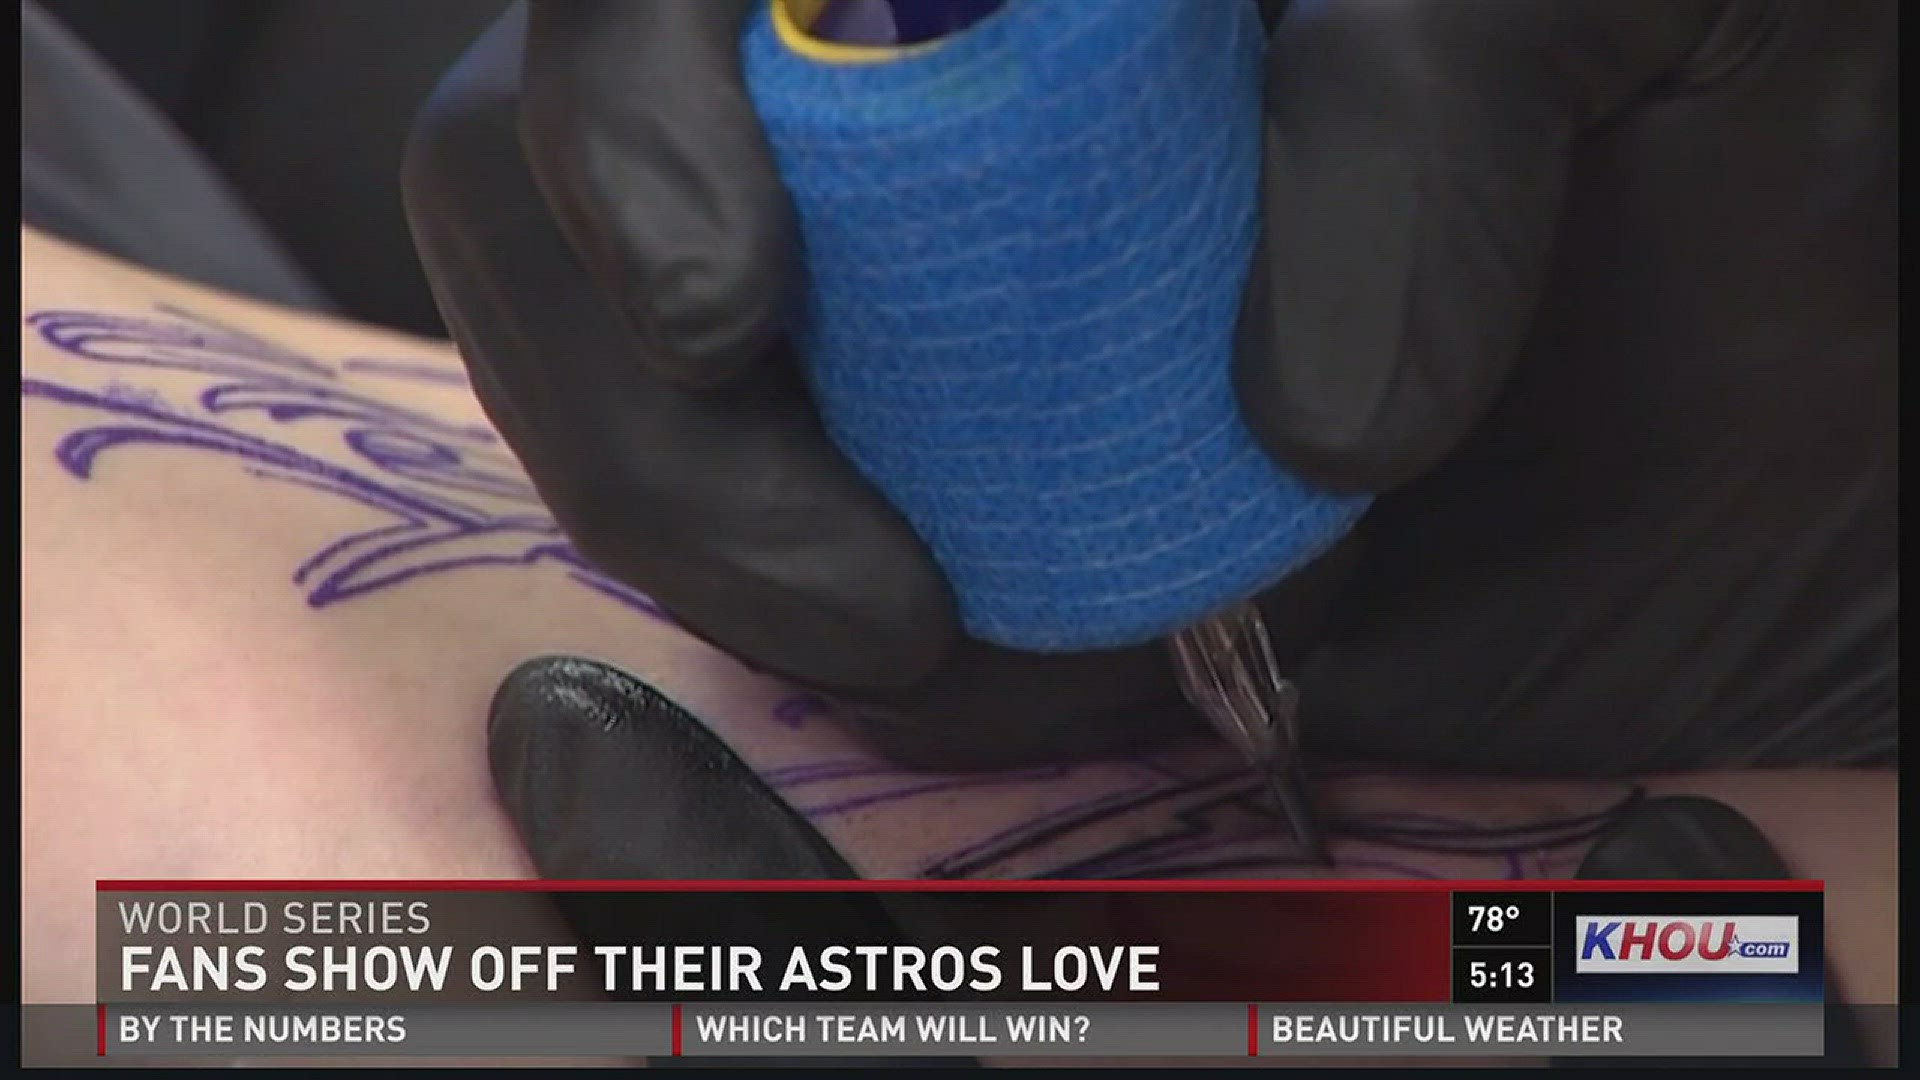 Astros tattoos: Fans show their loyalty in ink